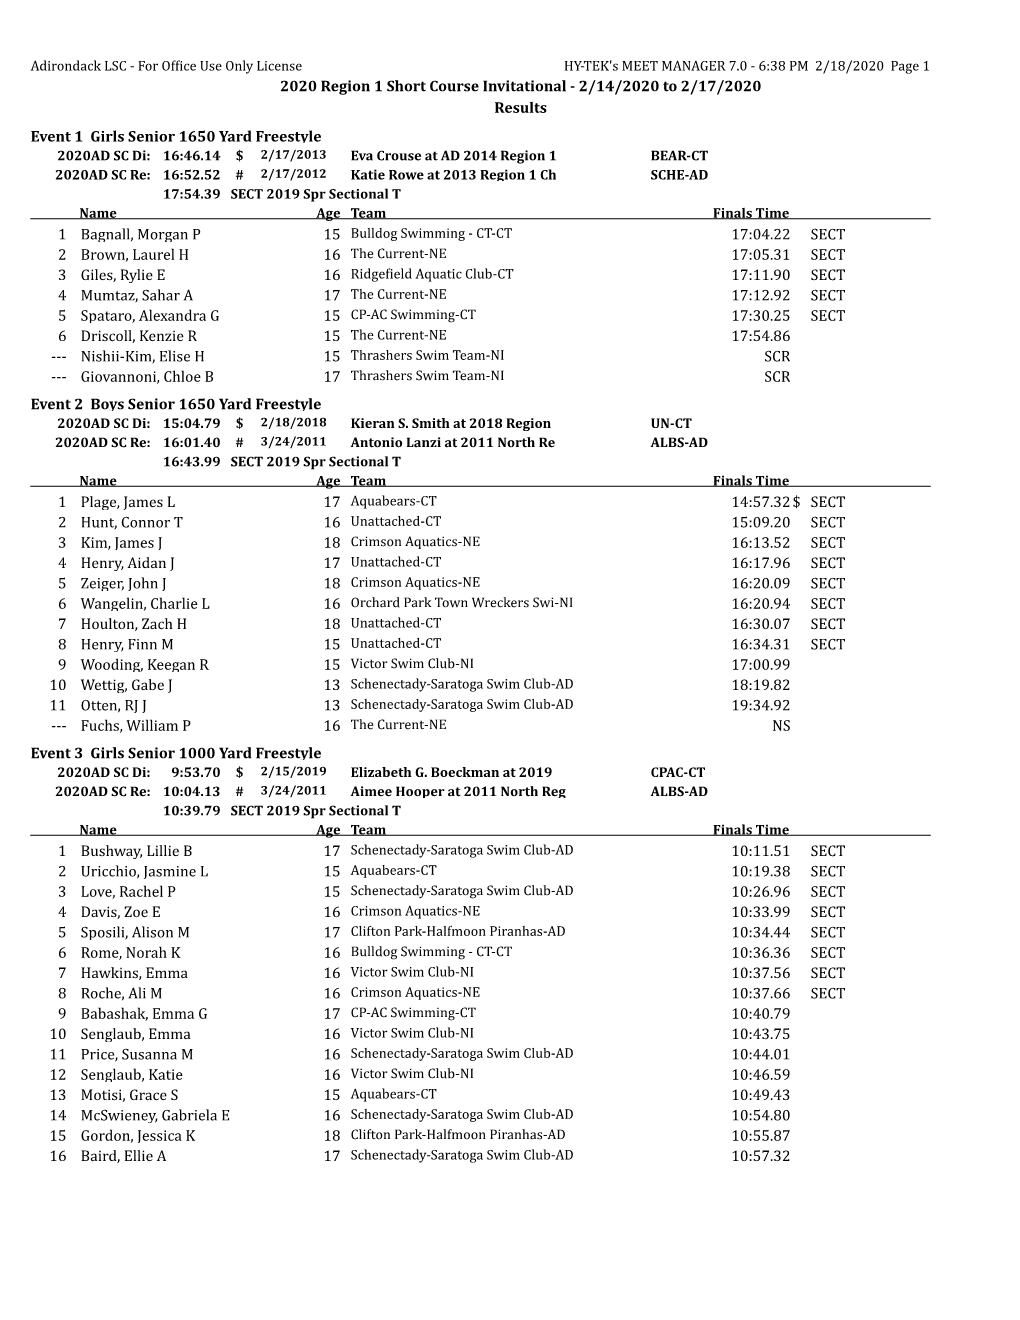 2020 Region 1 Short Course Invitational - 2/14/2020 to 2/17/2020 Results